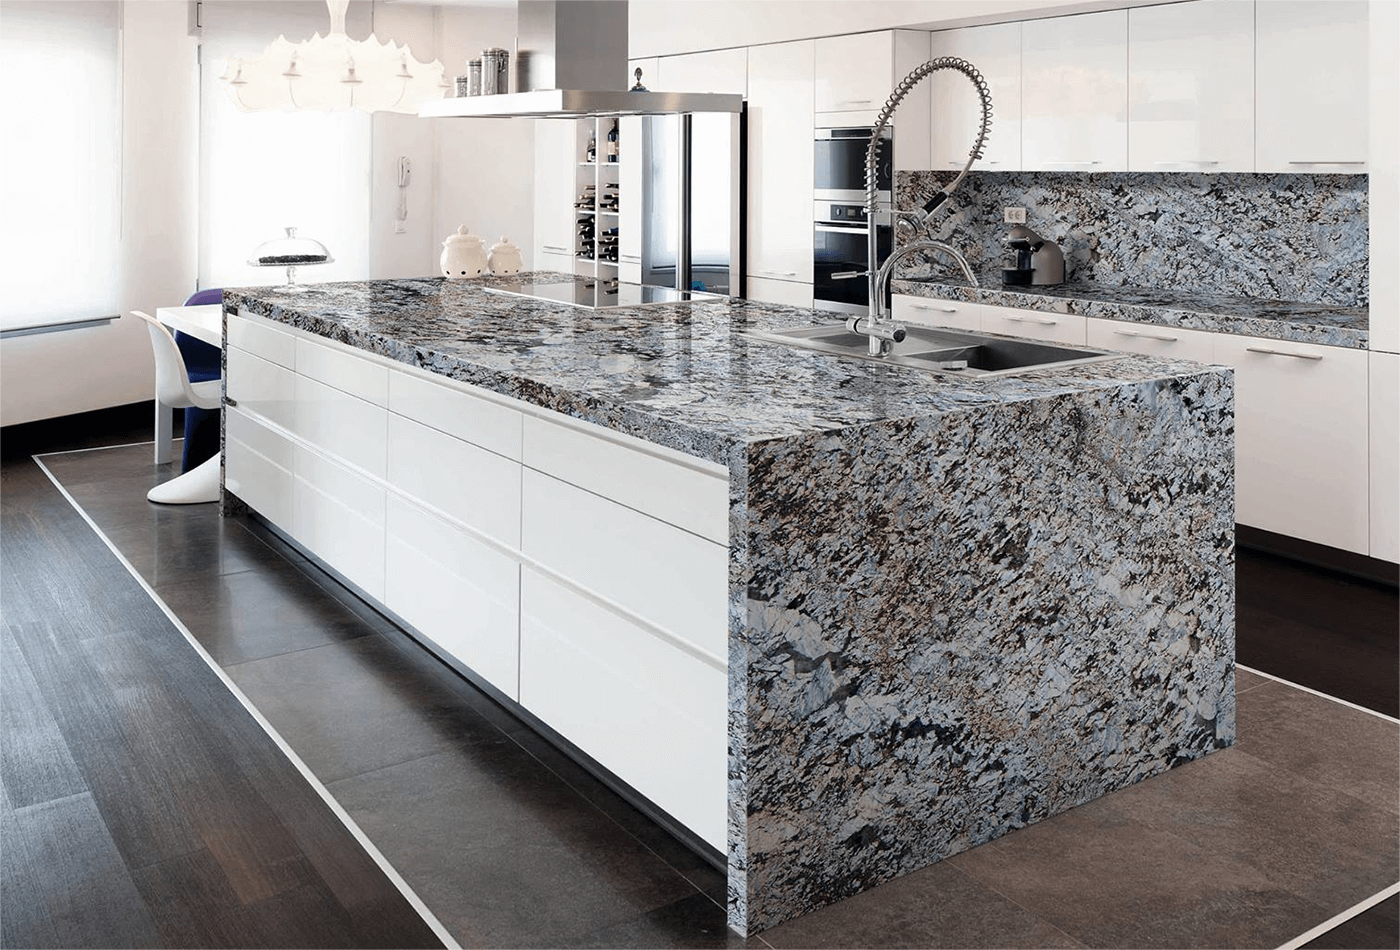 Granite with Veins; Small Difference Makes a Greater Impact